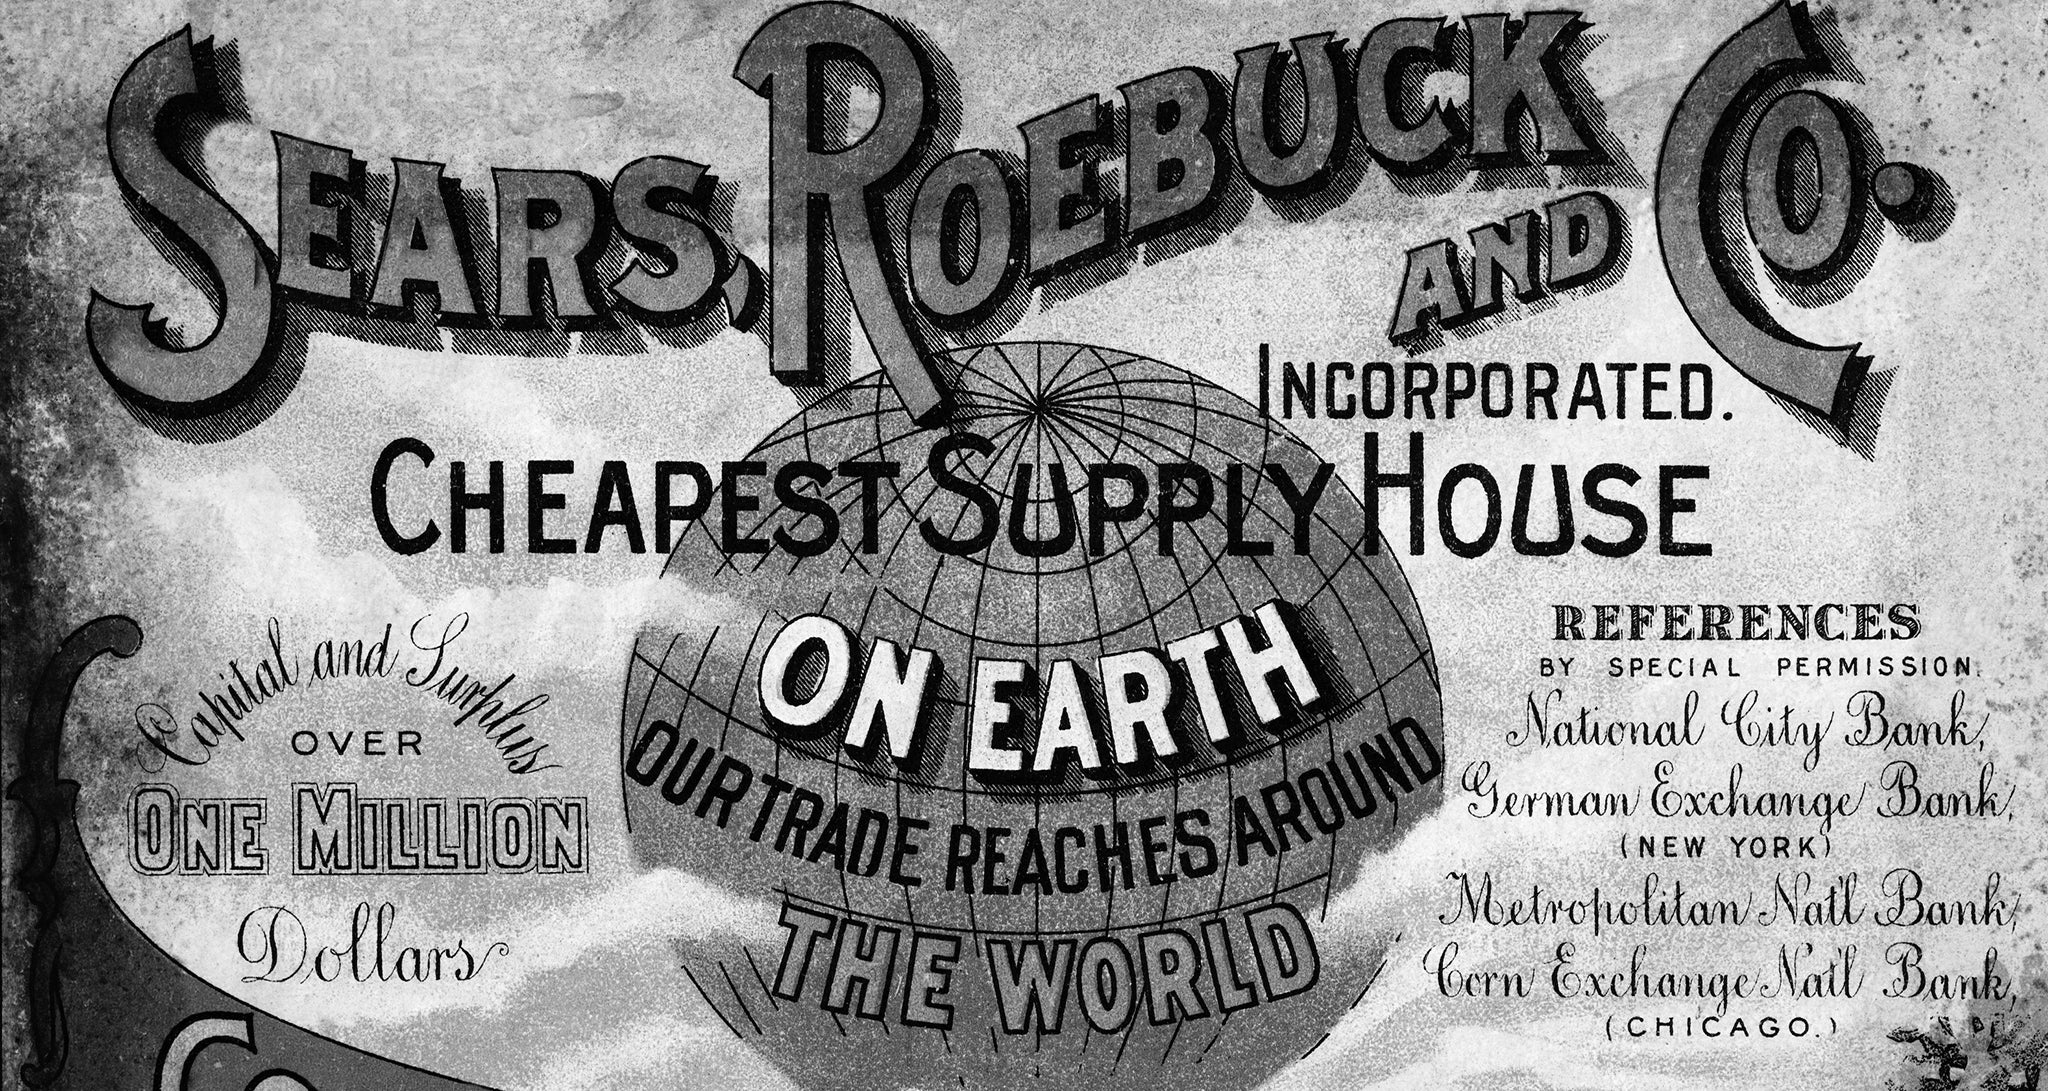 How Digital Currency is Like an Old Sears and Roebuck Catalog